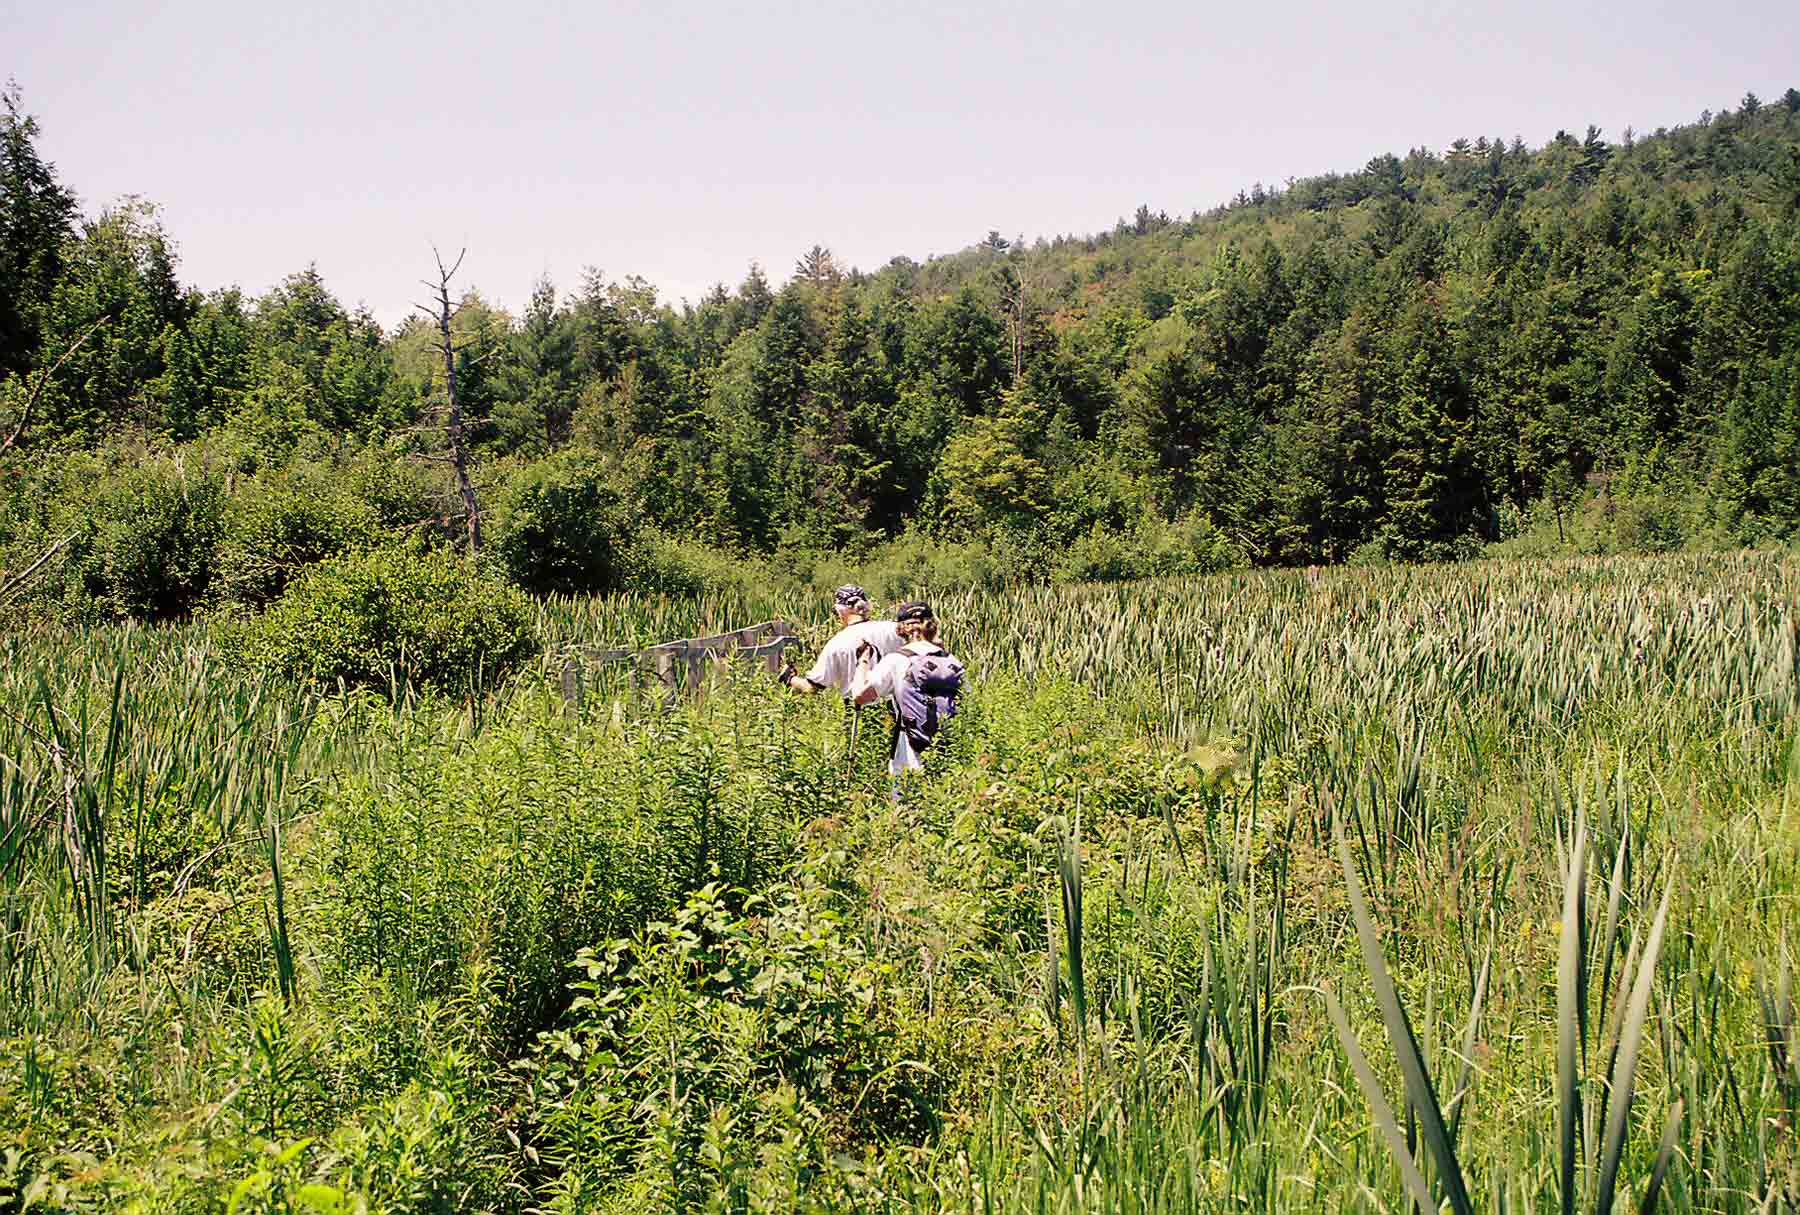 Sometimes the trail can get a wee bit overgrown. The trail just south of Trescott Road crosses this marsh. Taken in 2003 at approx. Mile 13.3.  Courtesy dlcul@conncoll.edu